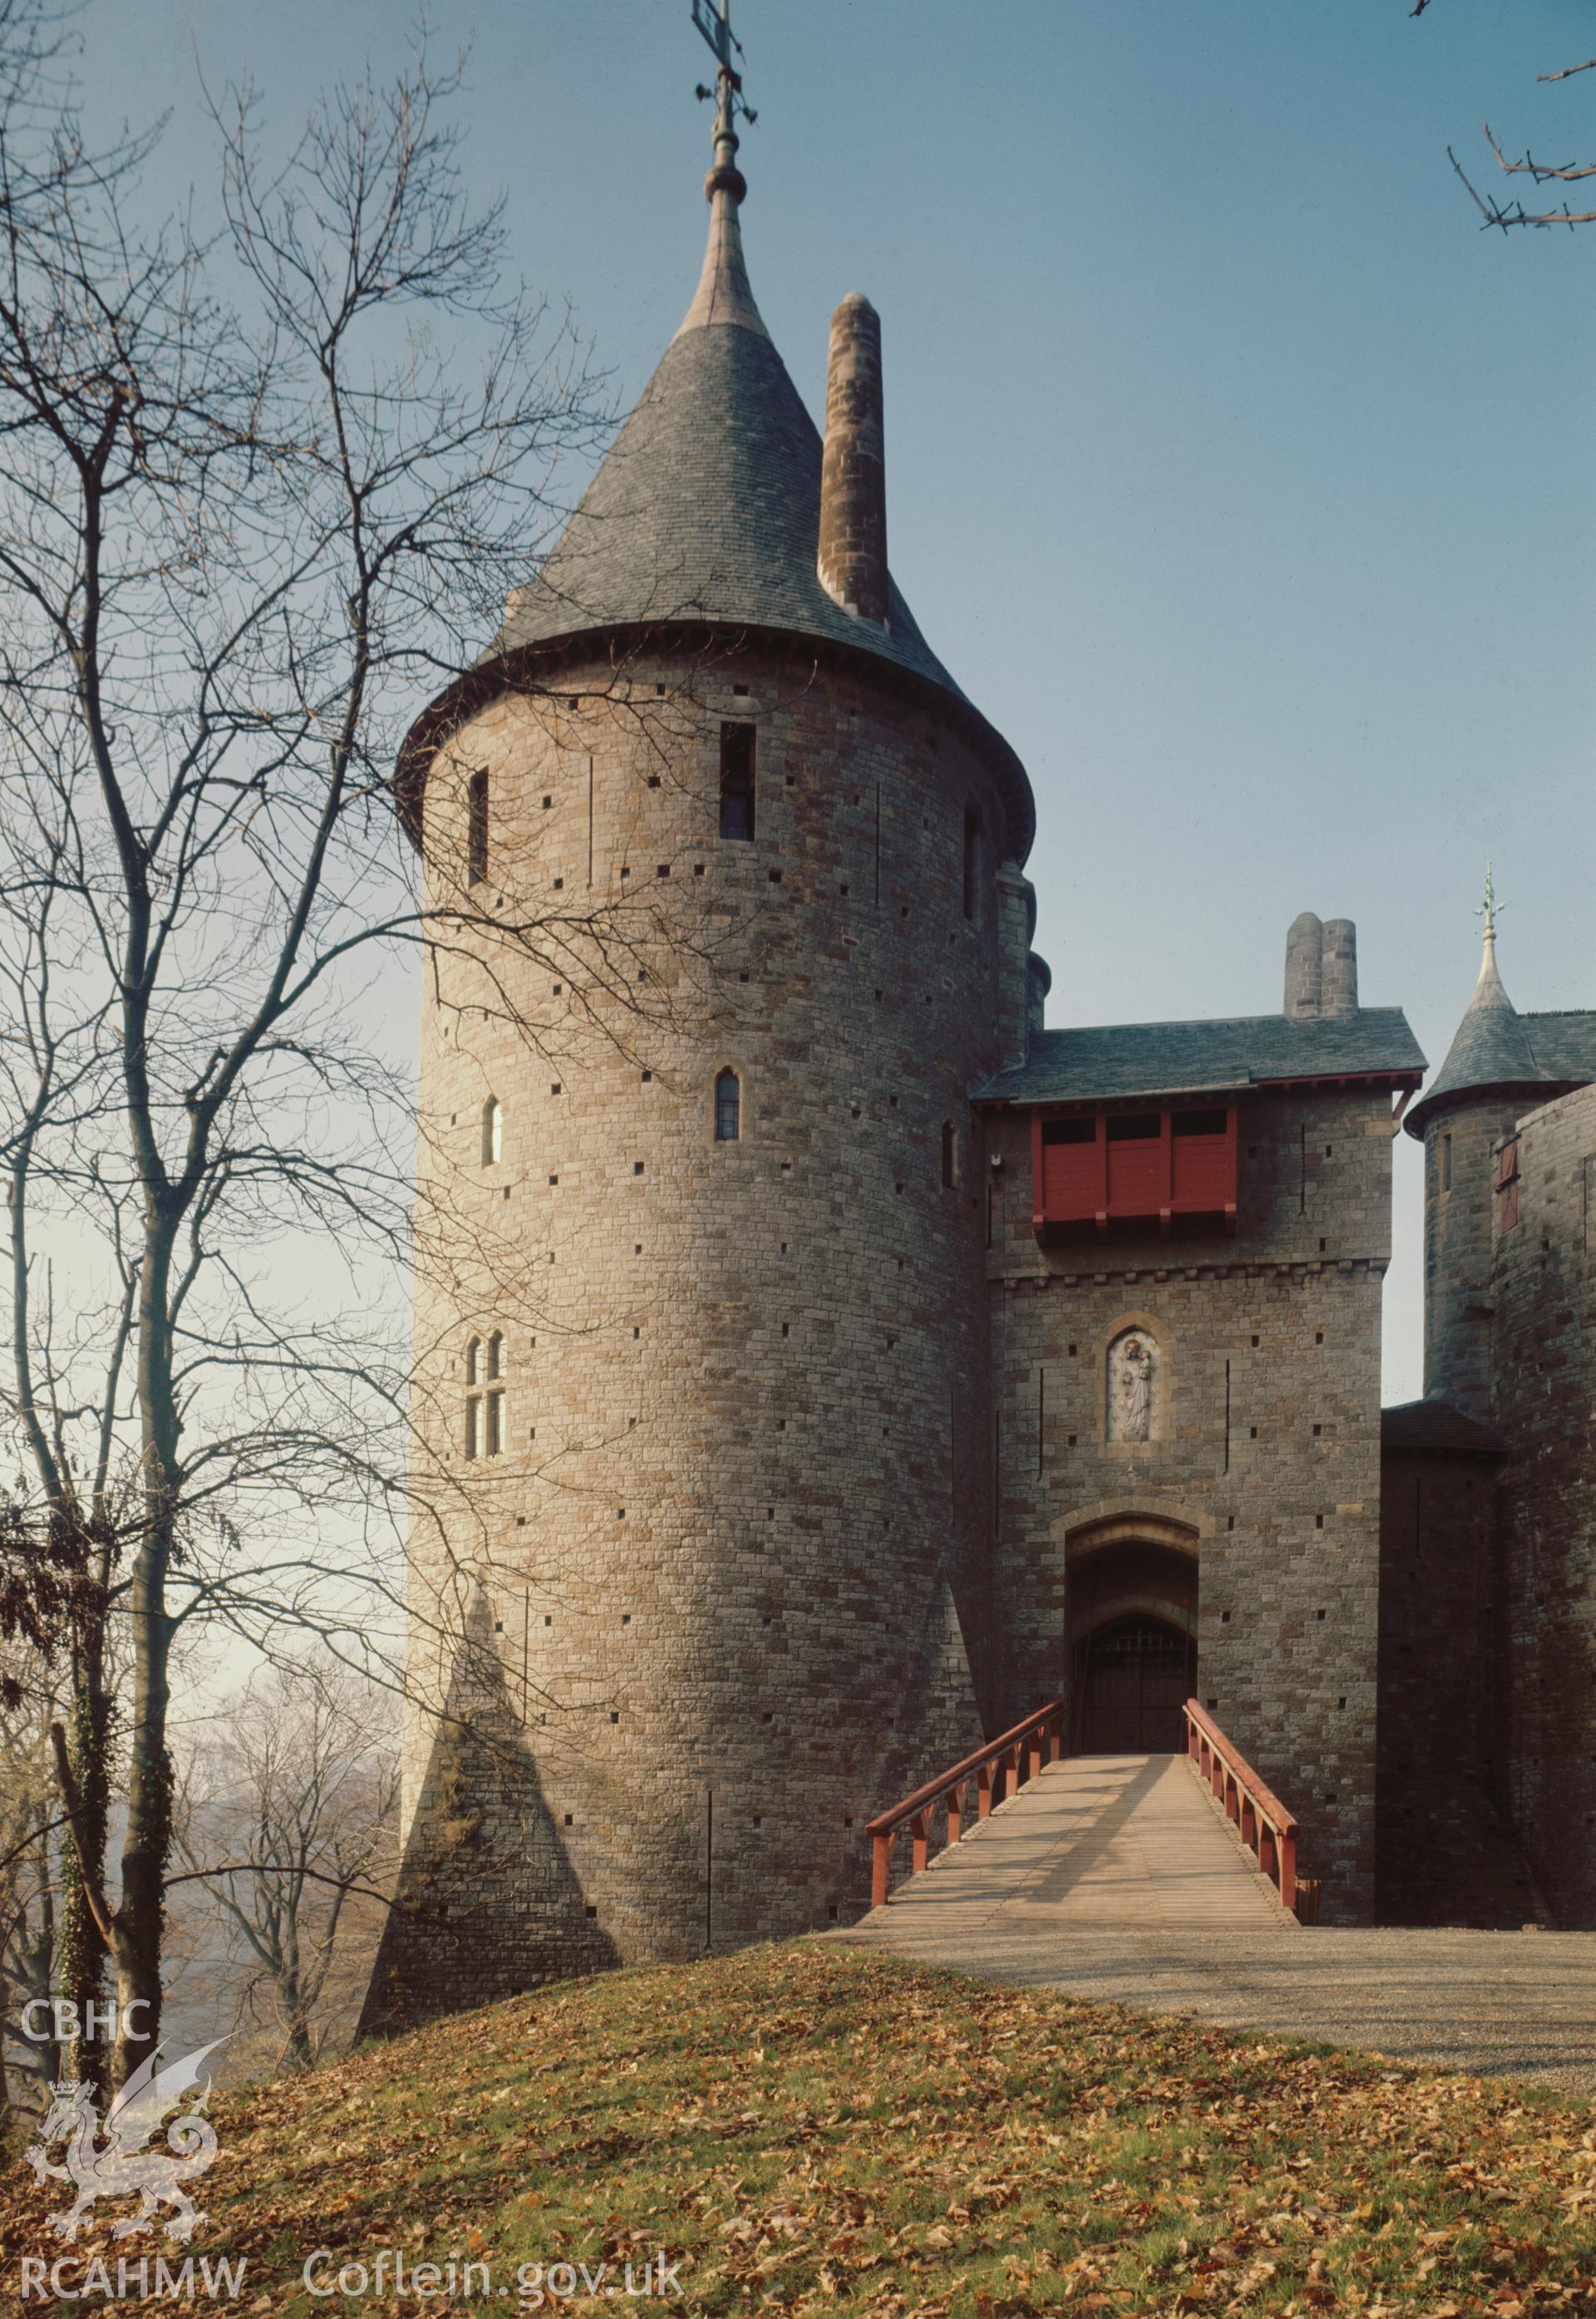 Exterior view of Castell Coch taken in 1975.